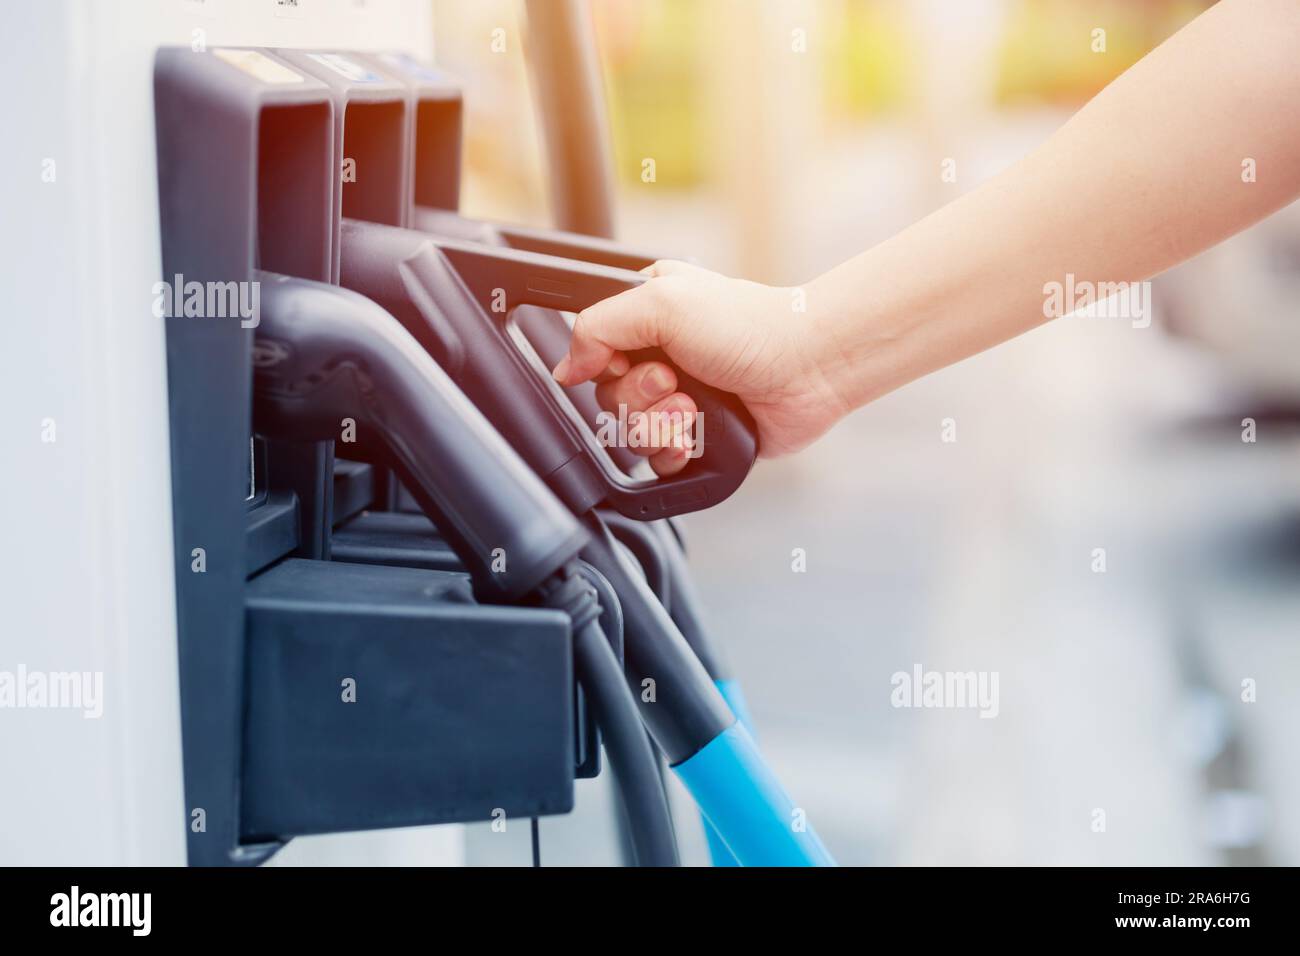 EV charging station dock head hand holding for modern electric car new energy standard for vehicle power. Stock Photo